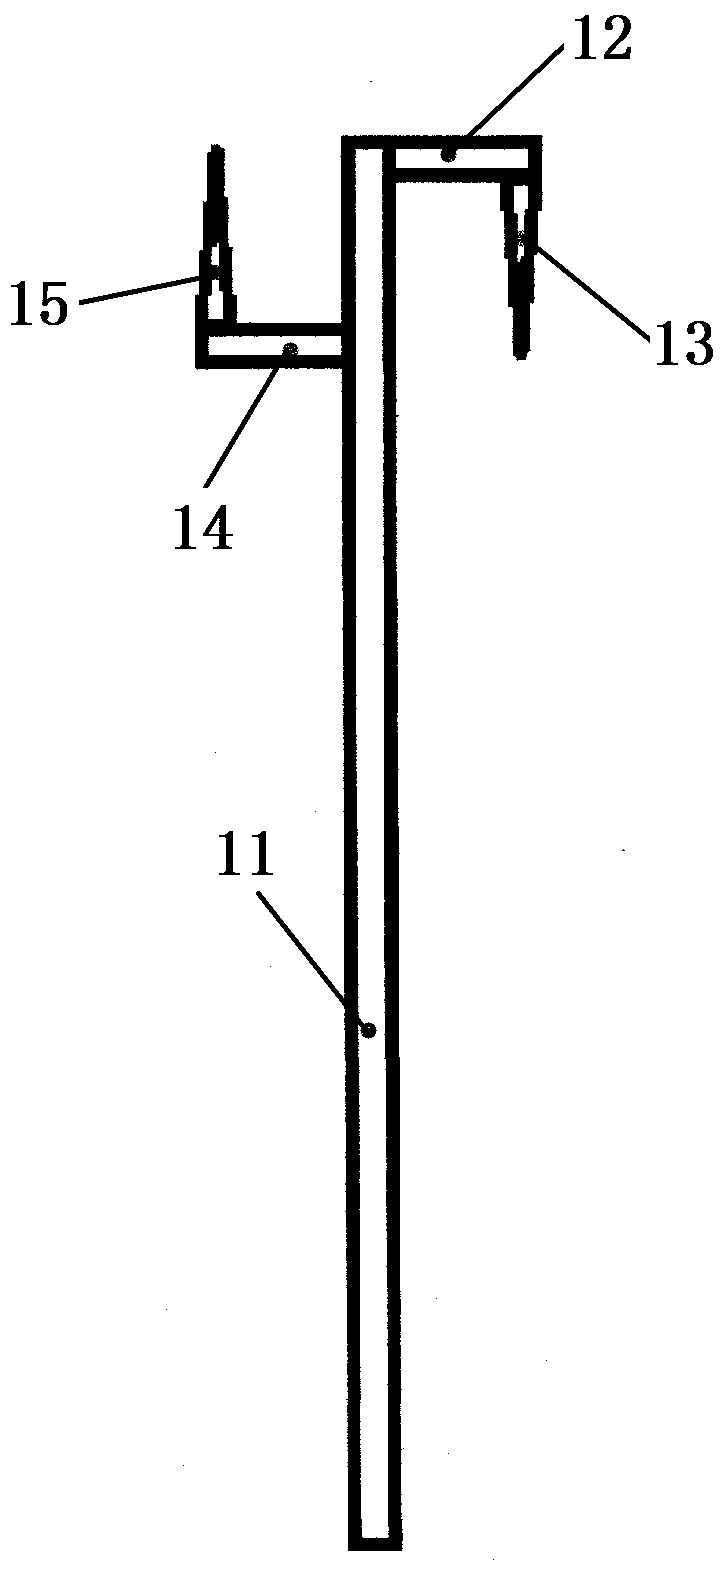 Construction method of using tools to install rubber waterstop for bridge expansion joint